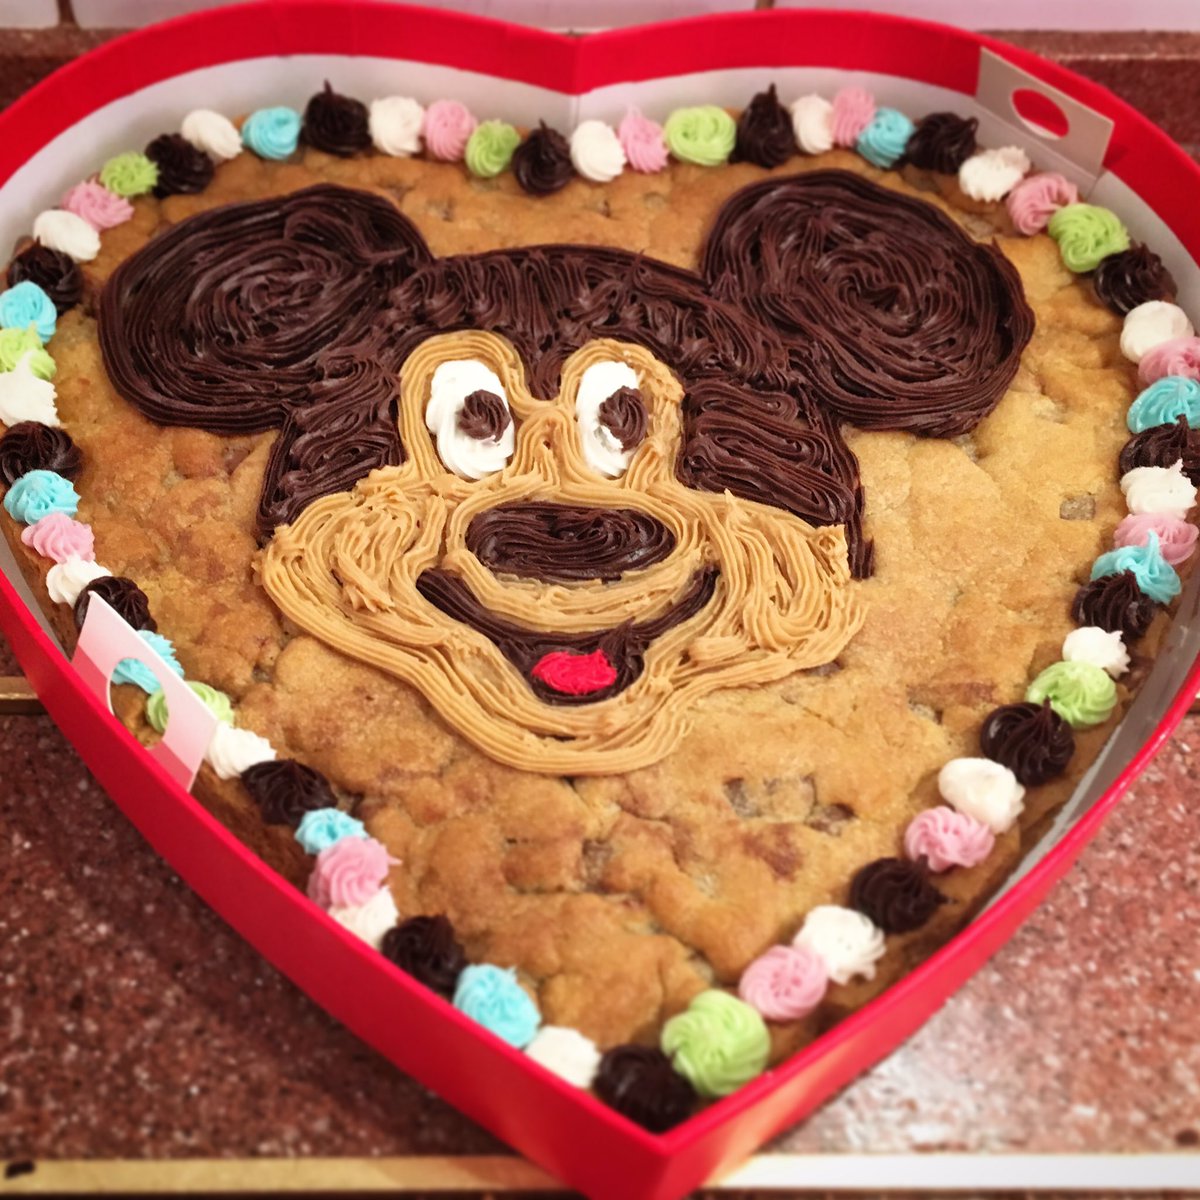 Rather chuffed with this; my first decorated cookie with a picture on it! 💕 #cookie #MickeyMouse #cookiedecoration #icing